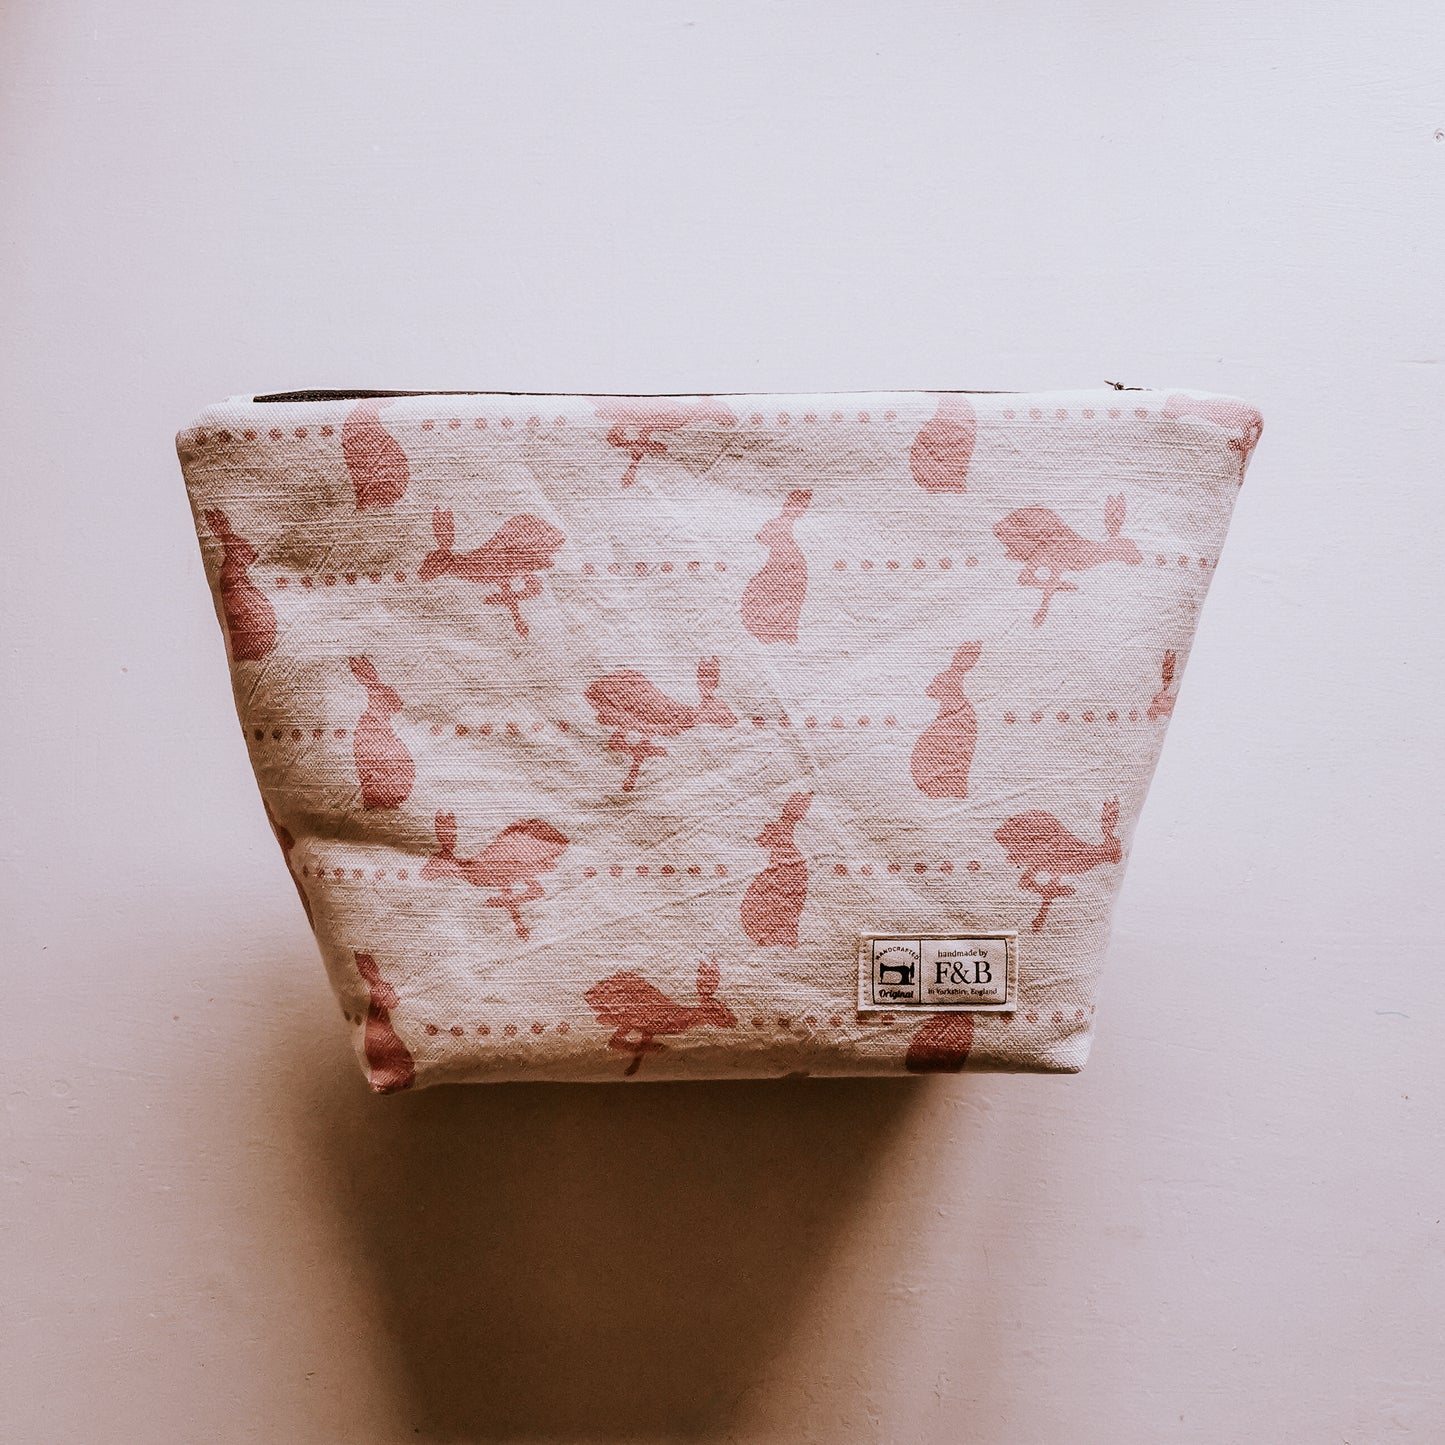 Handmade Wash bags featuring hare and dots pattern by F&B - Large and medium sized washbags inspired by yorkshire